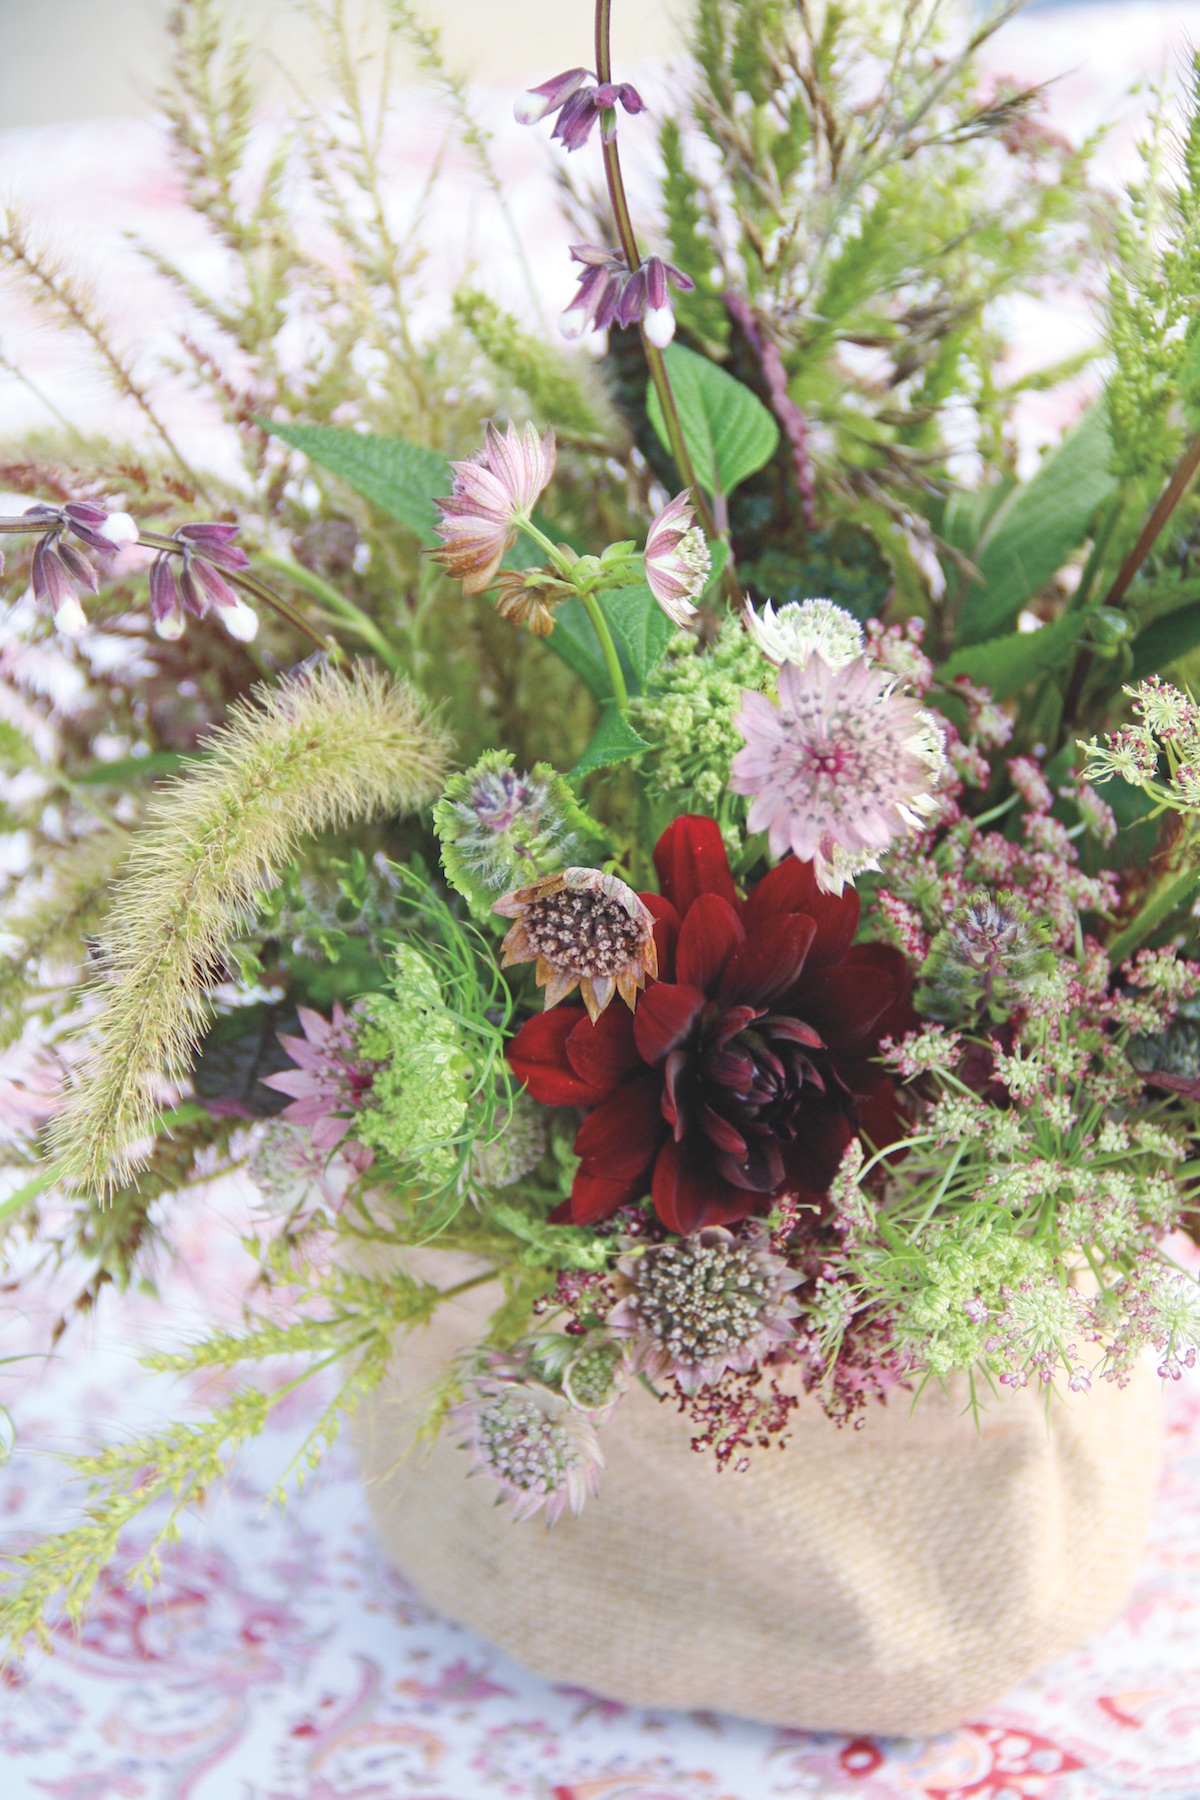 A bouquet of purple and green hues includes wild grasses, dahlias, masterwort, and chocolate Queen Anne’s lace.